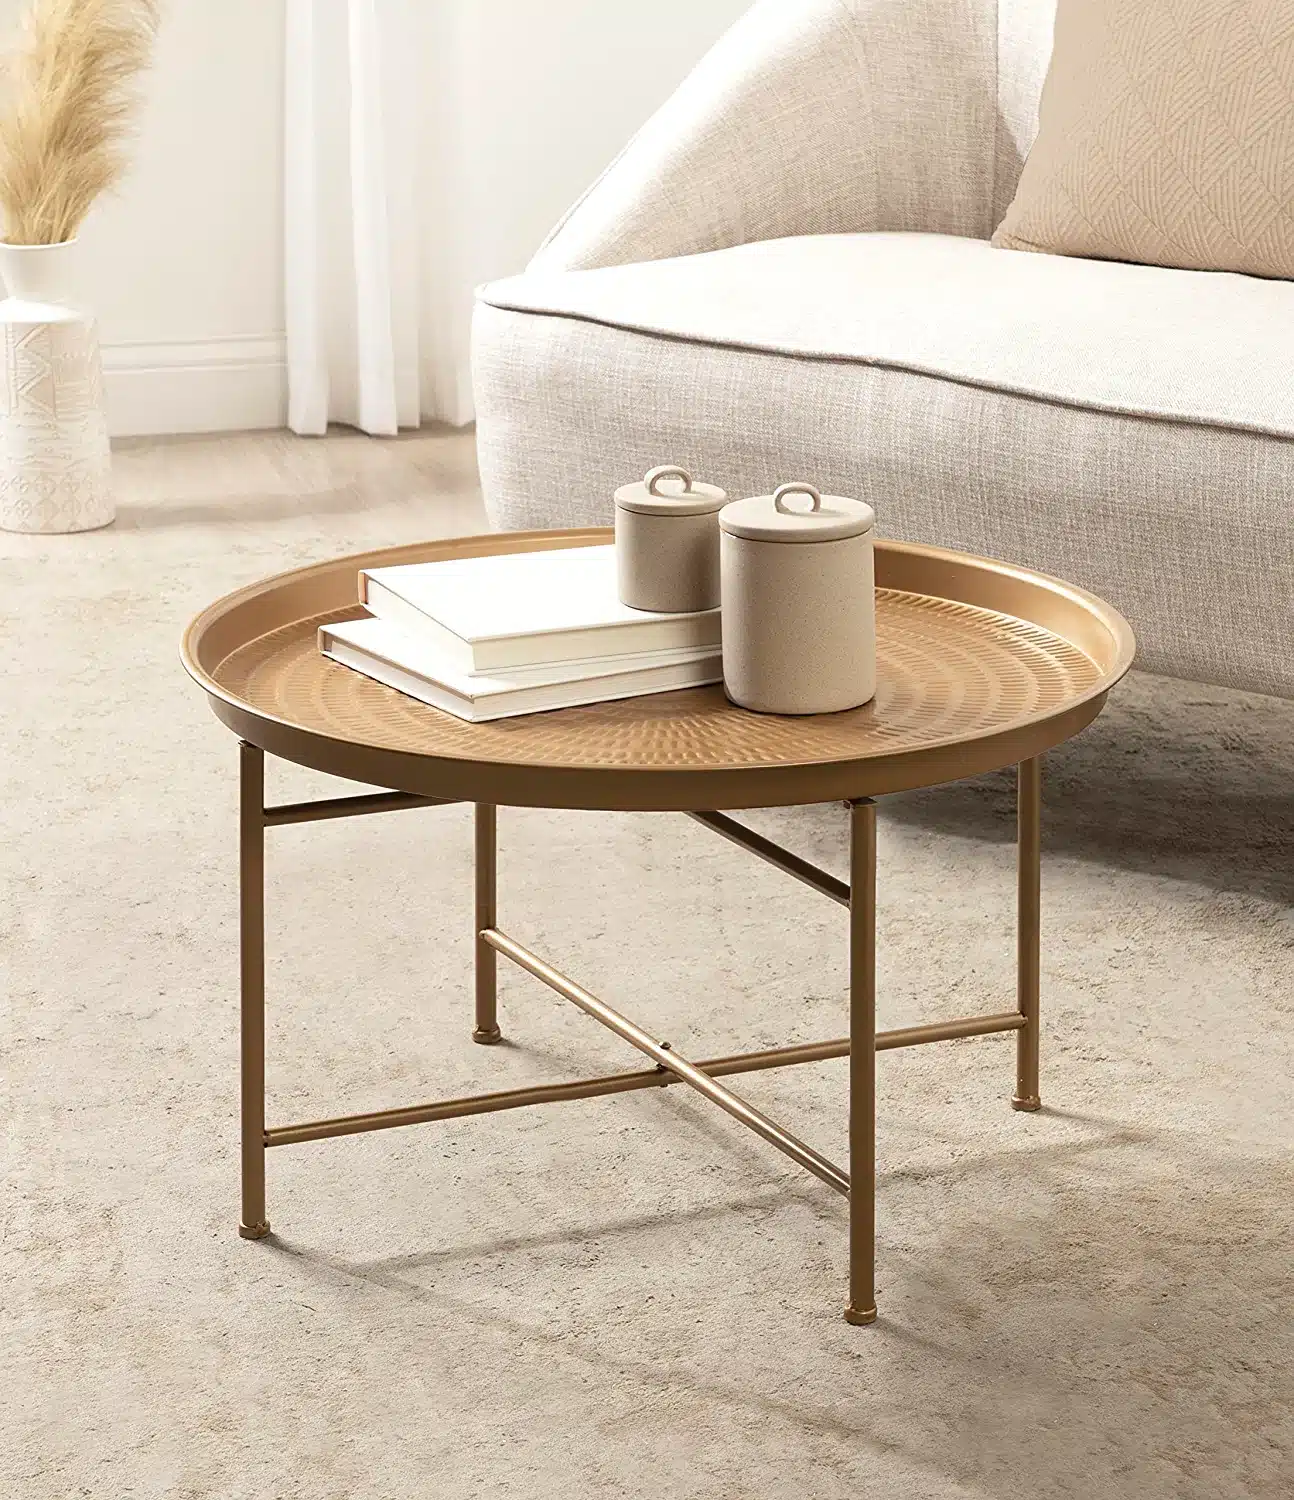 Boho-Chic Hammered Metal Table